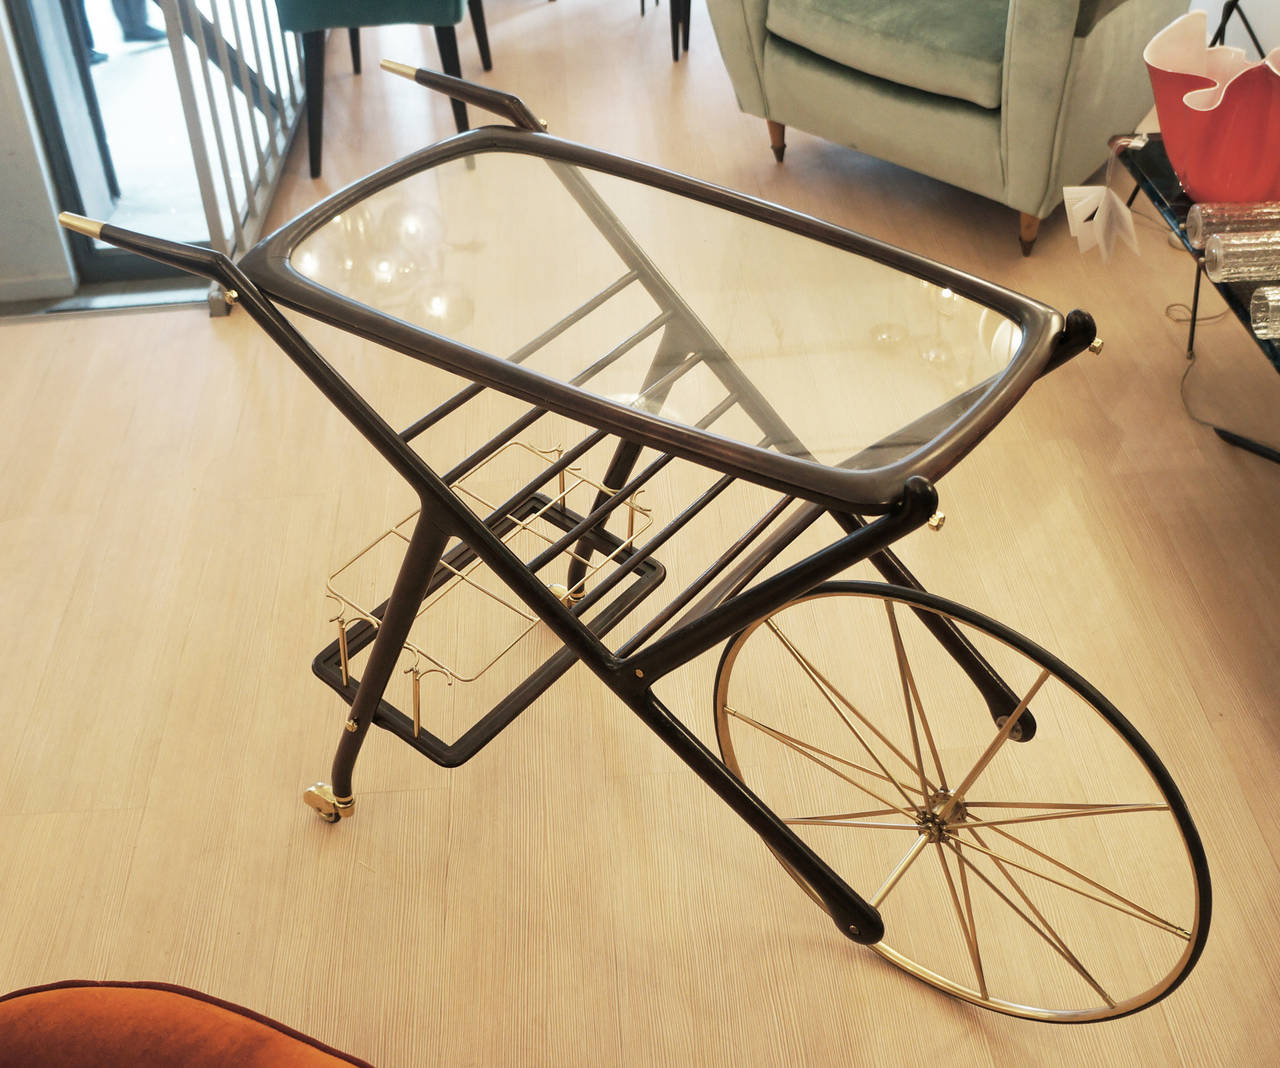 This bar cart differs tremendously from most of the others by the fact that it has one very large and two small wheels and it is also higher than most bar carts thus facilitating serving drinks. The top has a framed glass. Under the top in the